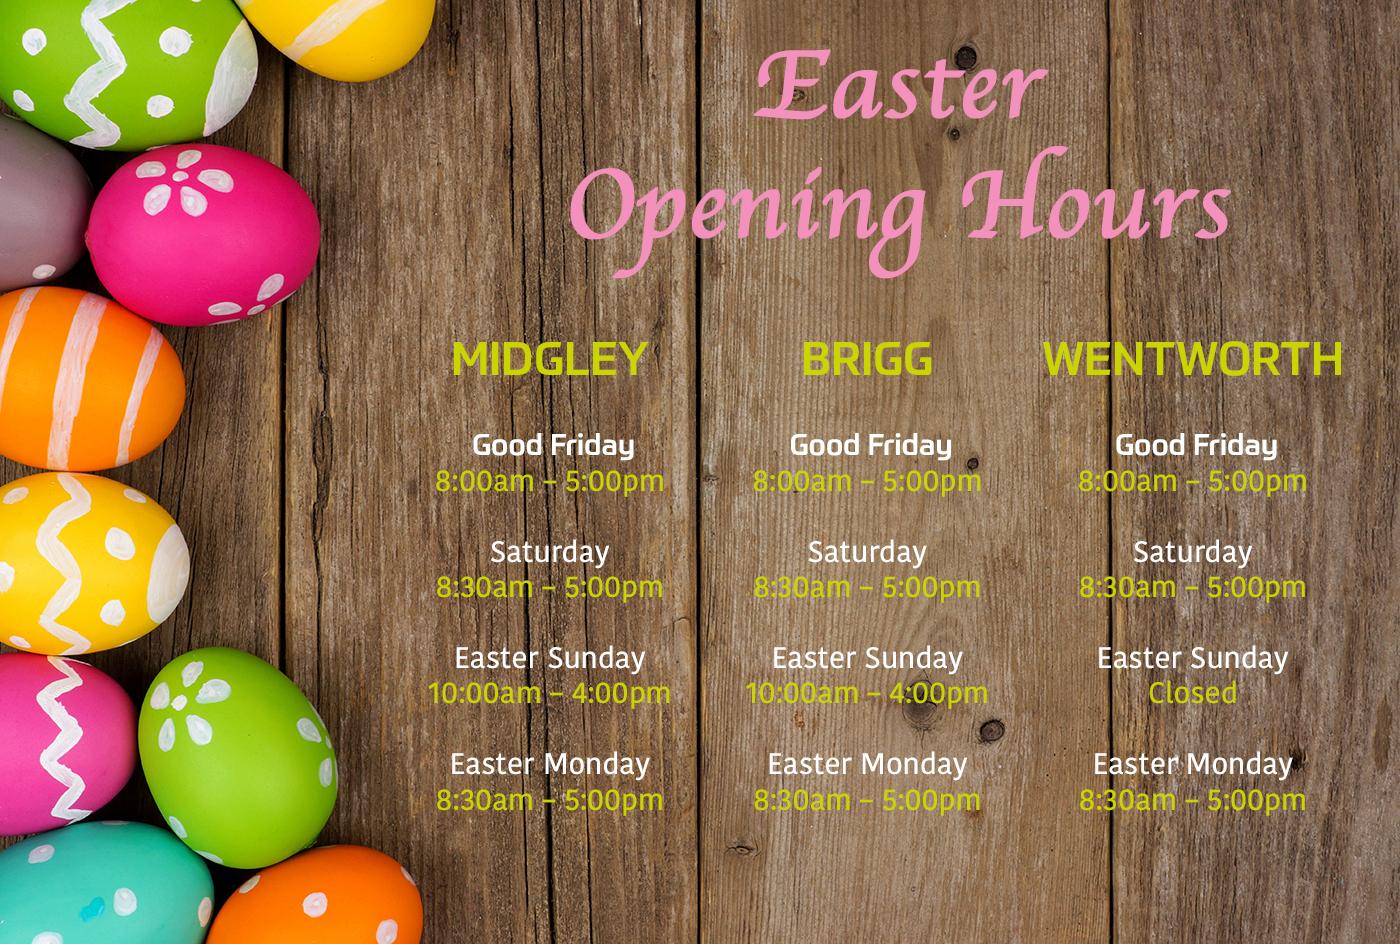 earnshaws fencing centres easter opening hours